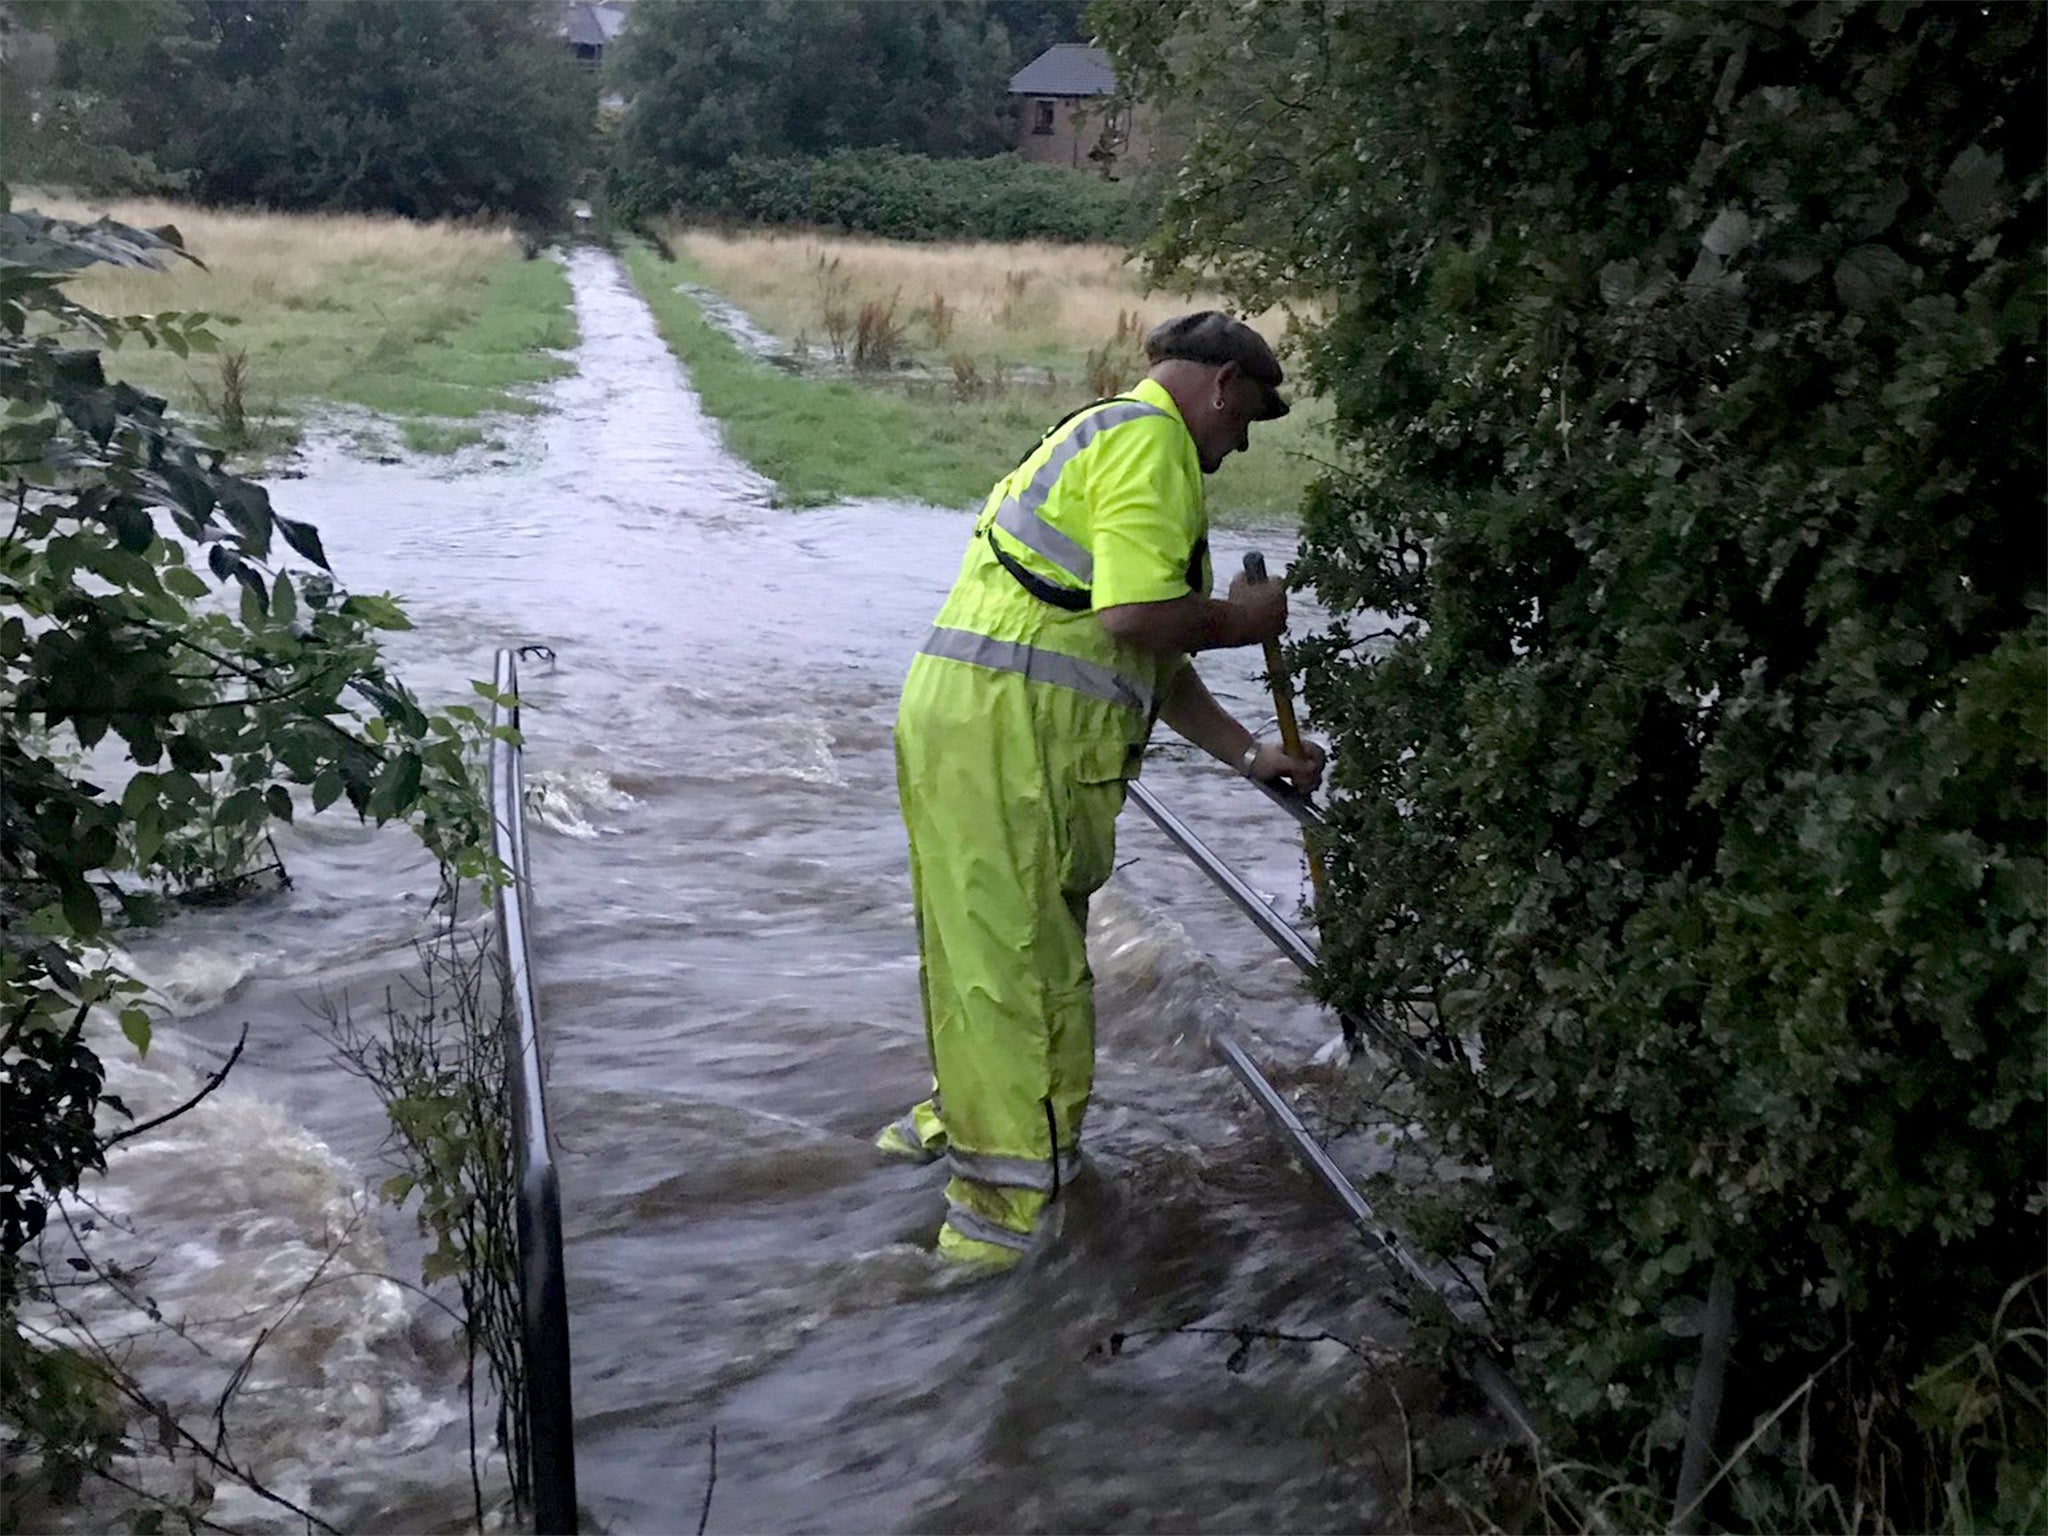 Response teams were out early on Tuesday to limit the impact of flooding in Lancaster